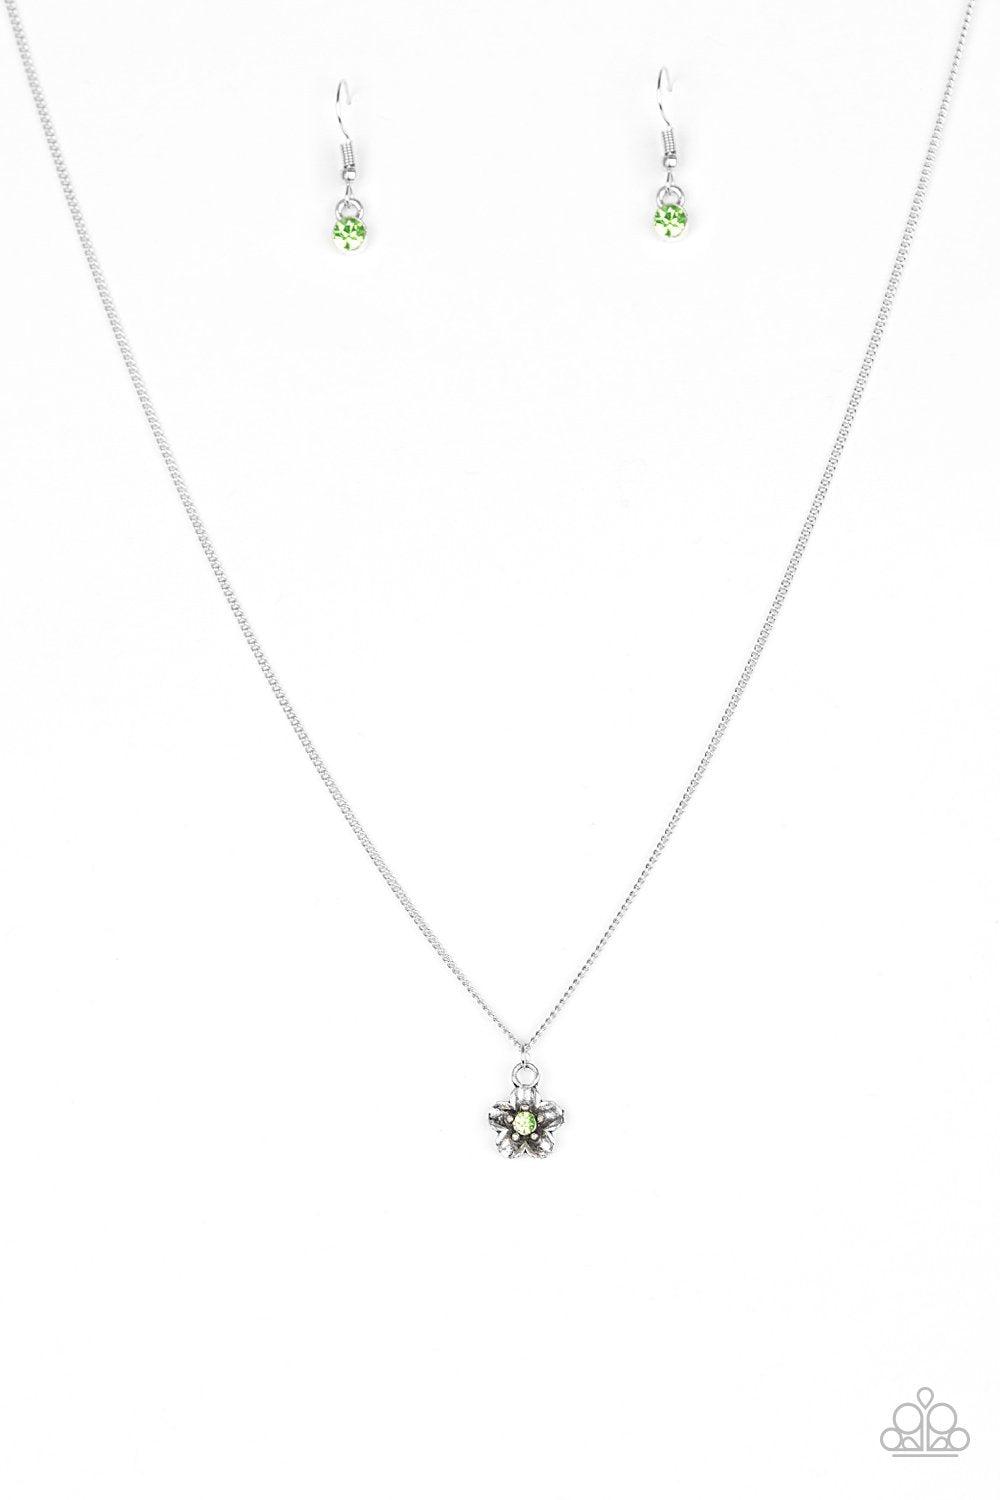 Boho Botanical Silver and Green Flower Necklace - Paparazzi Accessories-CarasShop.com - $5 Jewelry by Cara Jewels